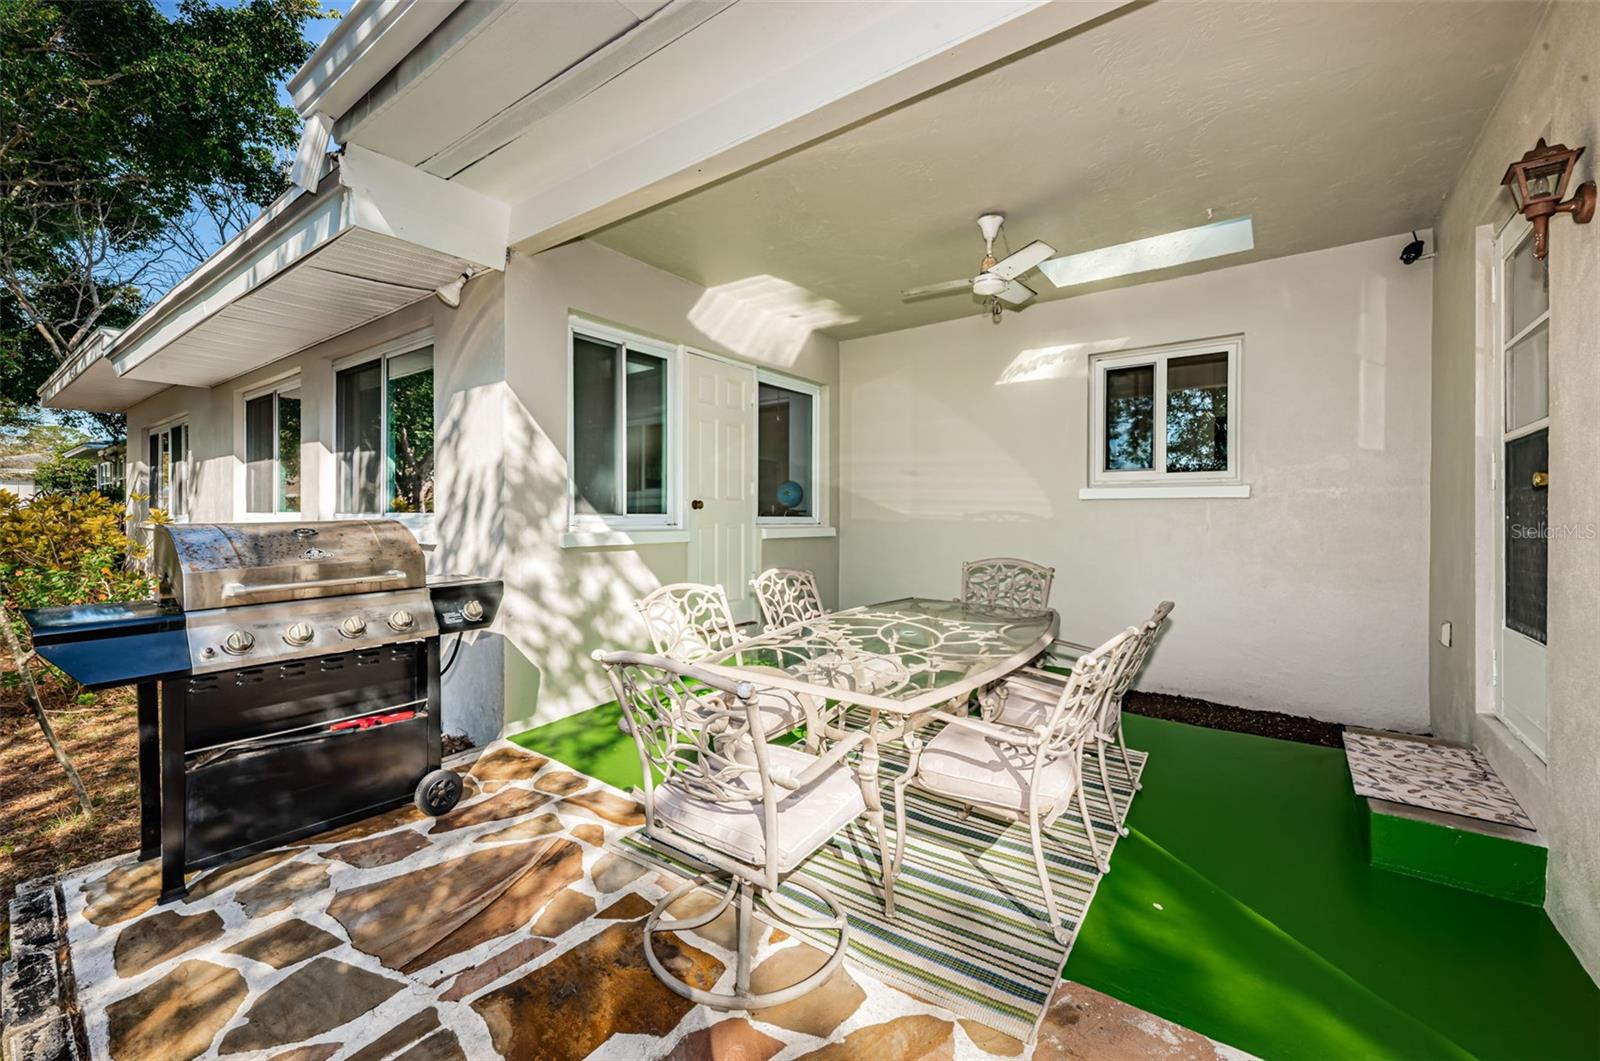 Covered back patio is easily screened with access from bonus room and dining room.